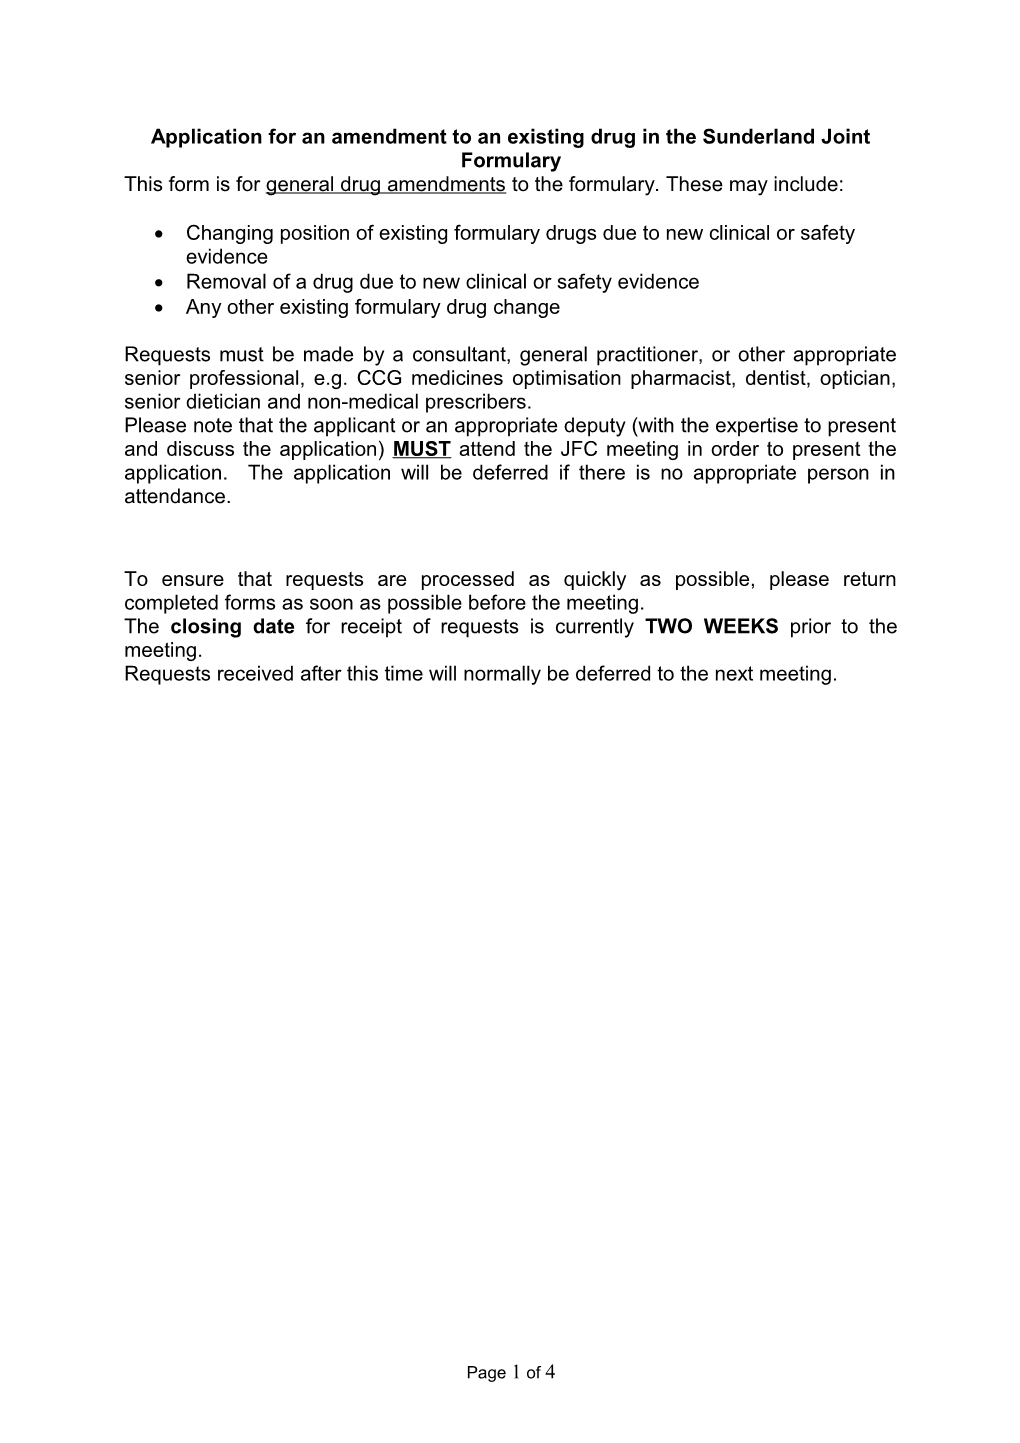 Application for an Amendment to an Existing Drug in the Sunderland Joint Formulary